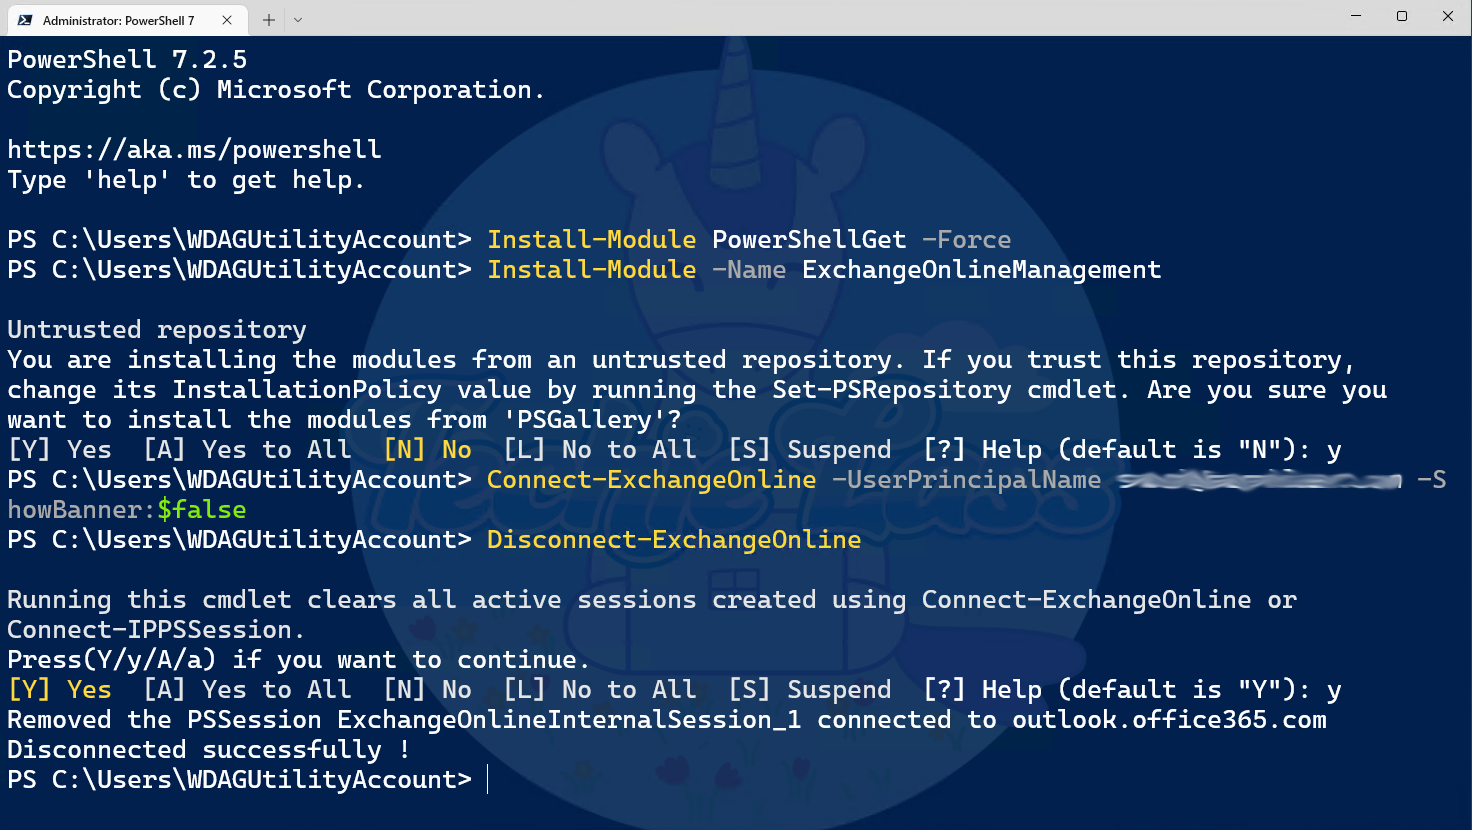 Windows Terminal with PowerShell command history